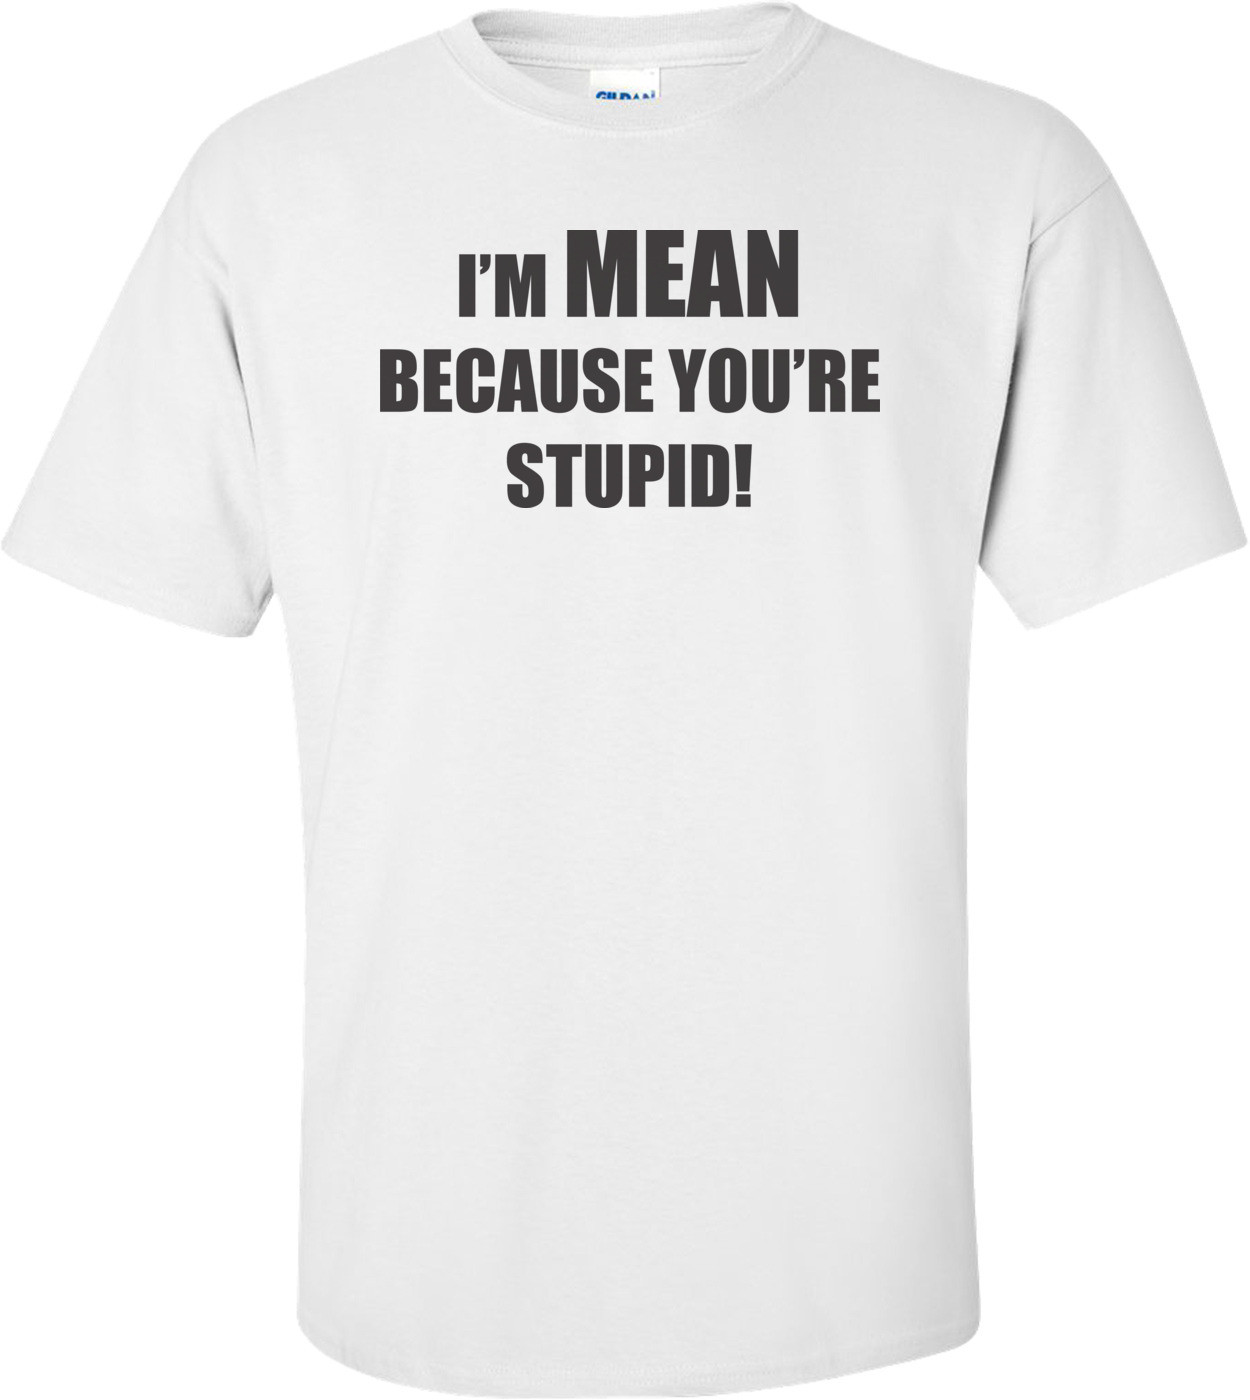 I'm Mean Because You're Stupid T-shirt